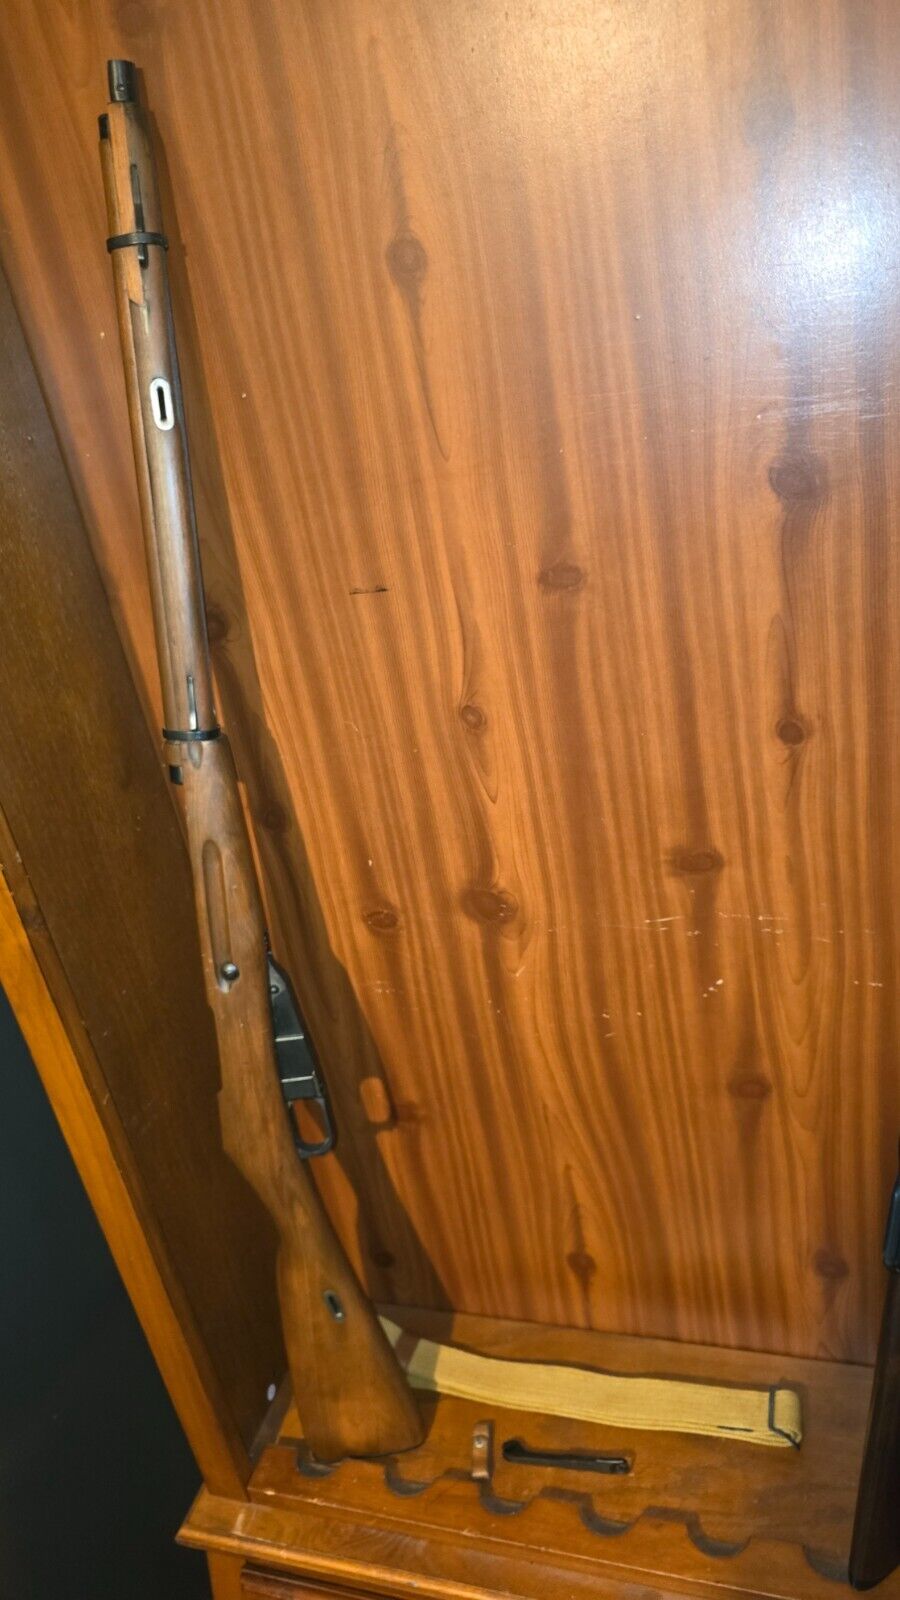 Mosin Nagant Stock M91/30 With butt plate laminate and other parts